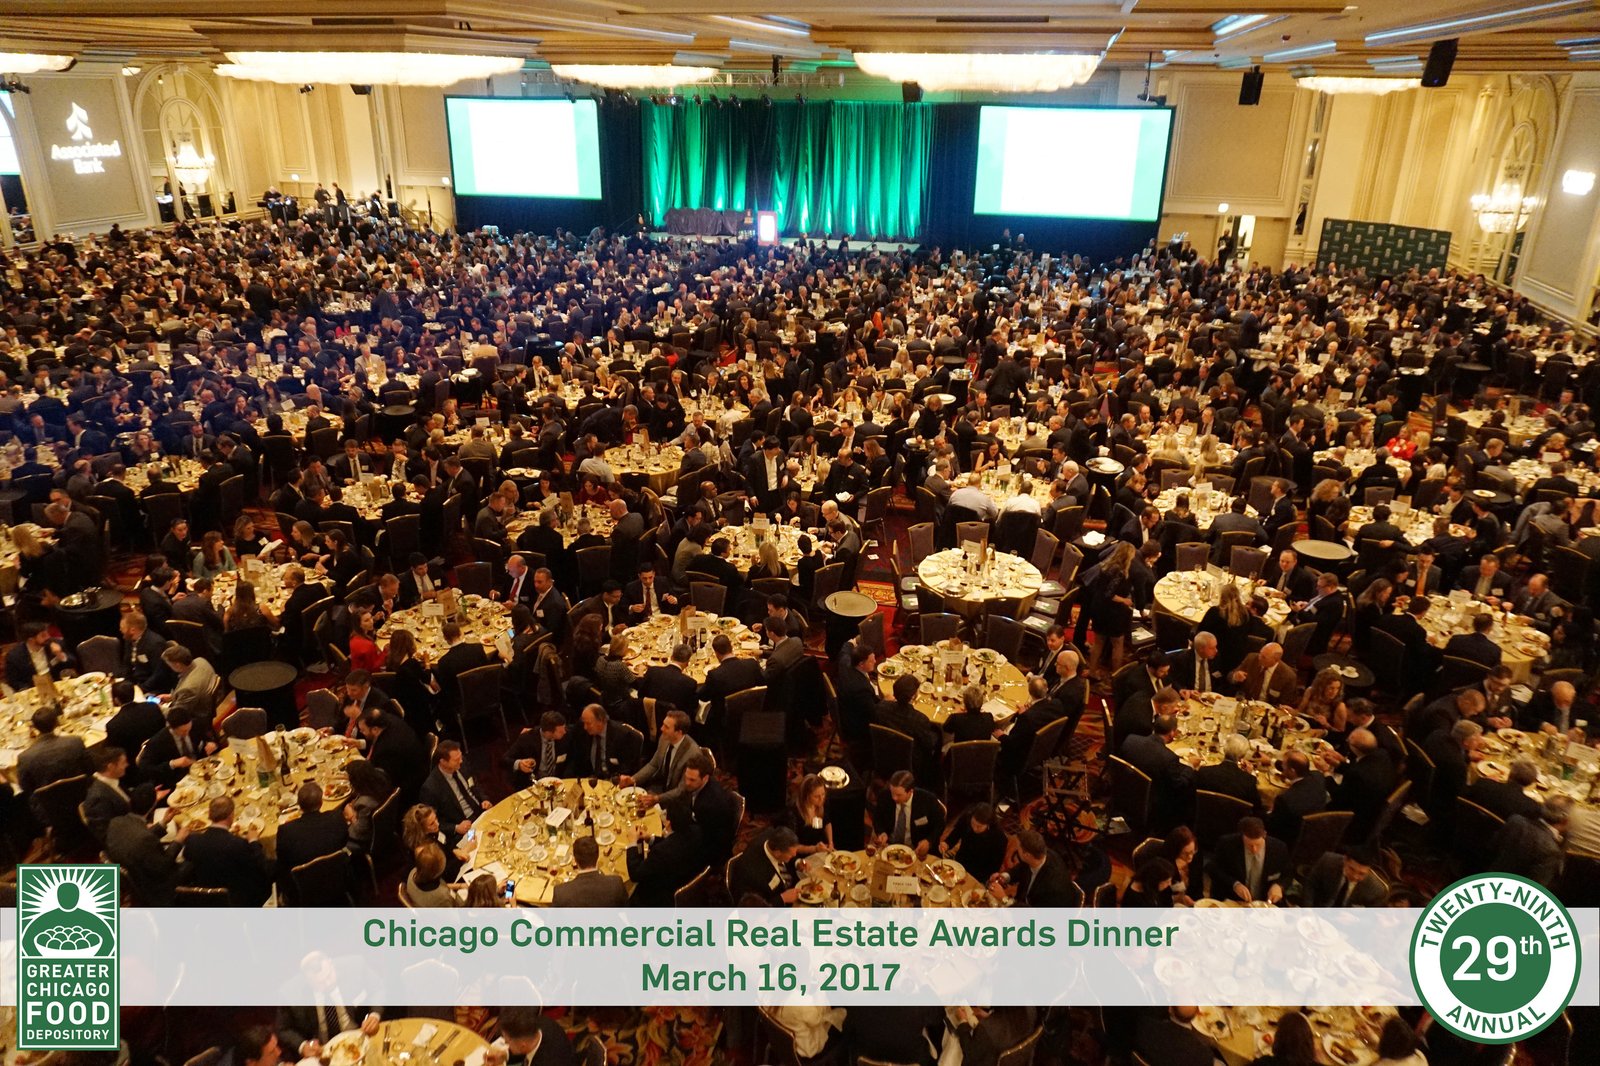 Chicago Commercial Real Estate Awards Convey Wide Honors